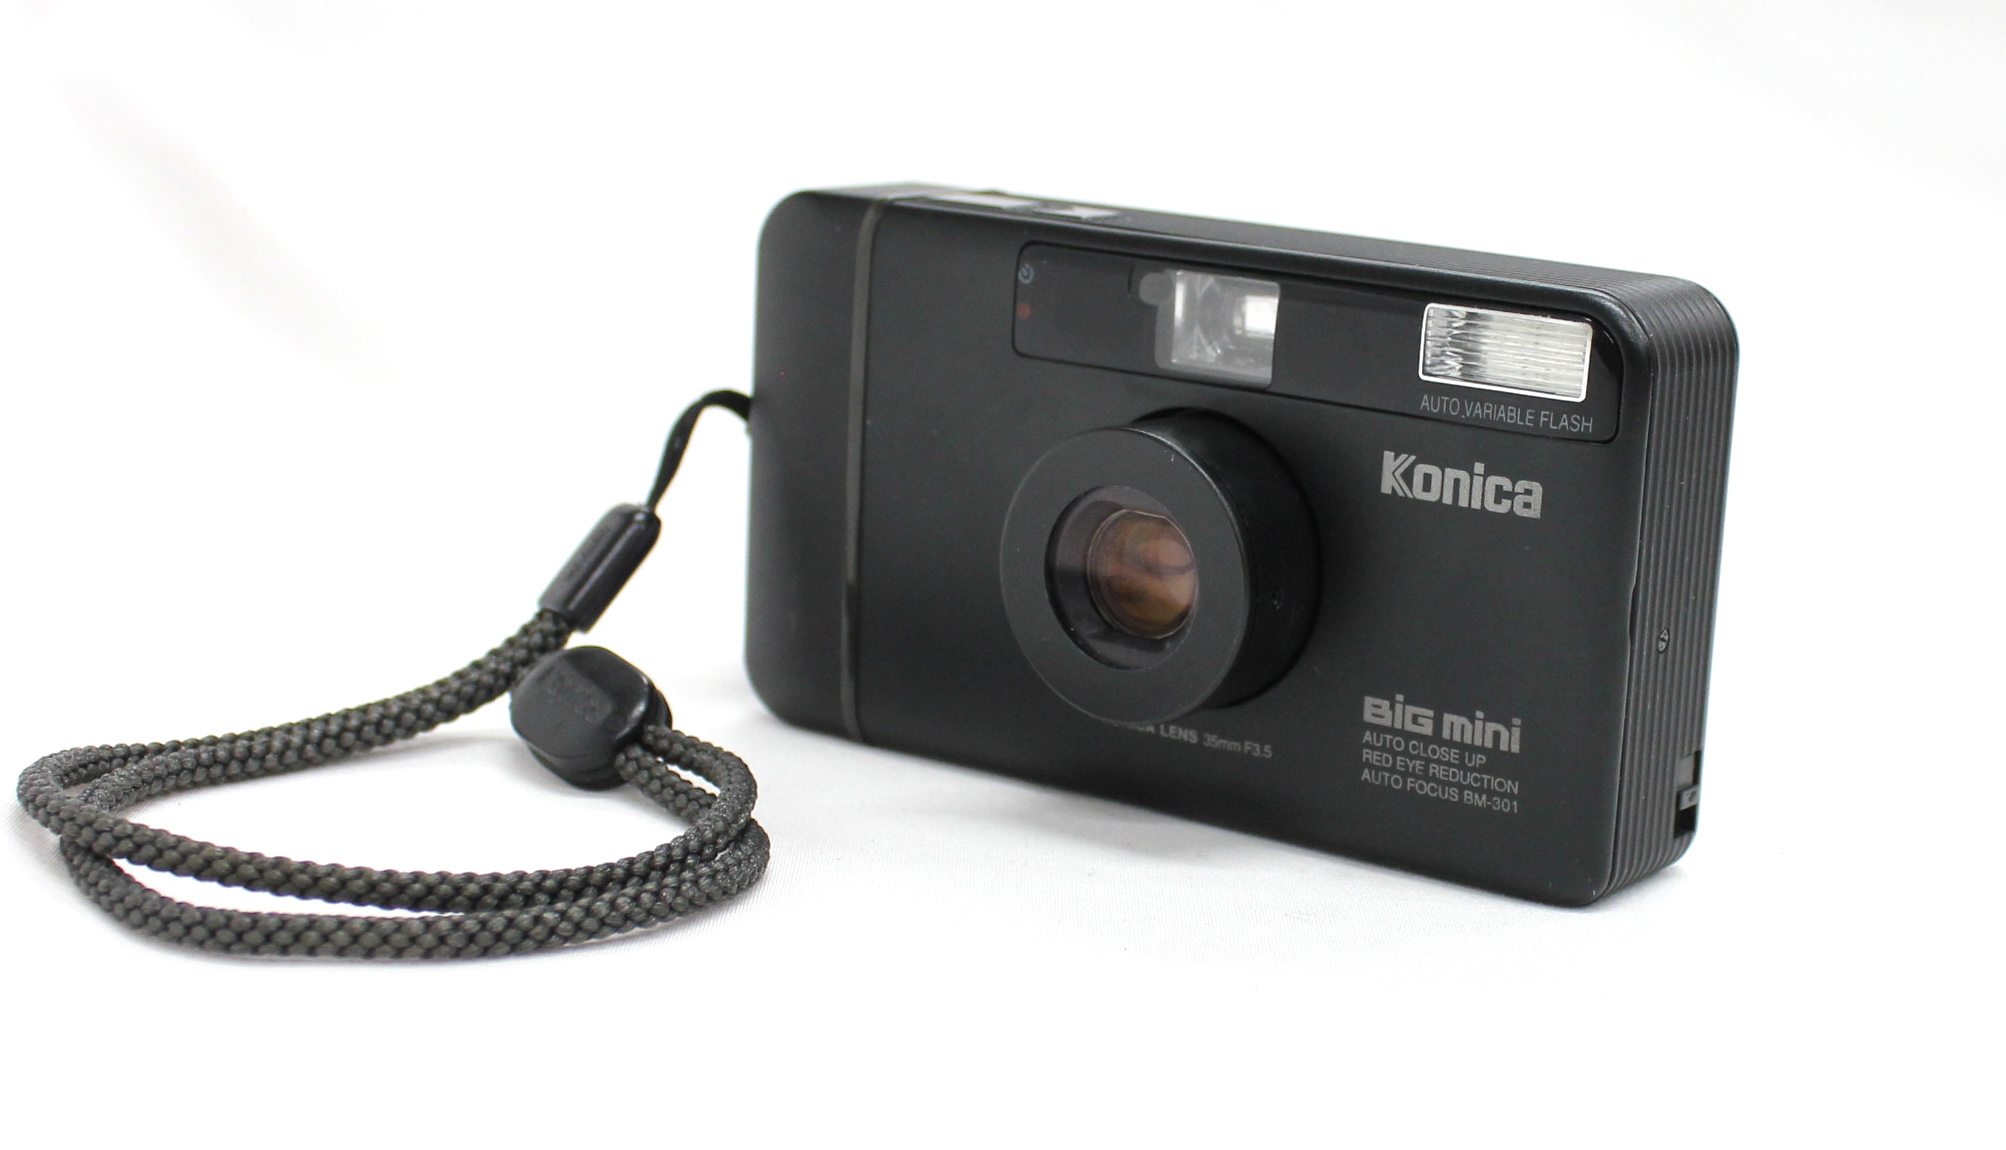 Japan Used Camera Shop | [Excellent+++++] Konica Big Mini BM-301 35mm Point & Shoot Film Camera from Japan